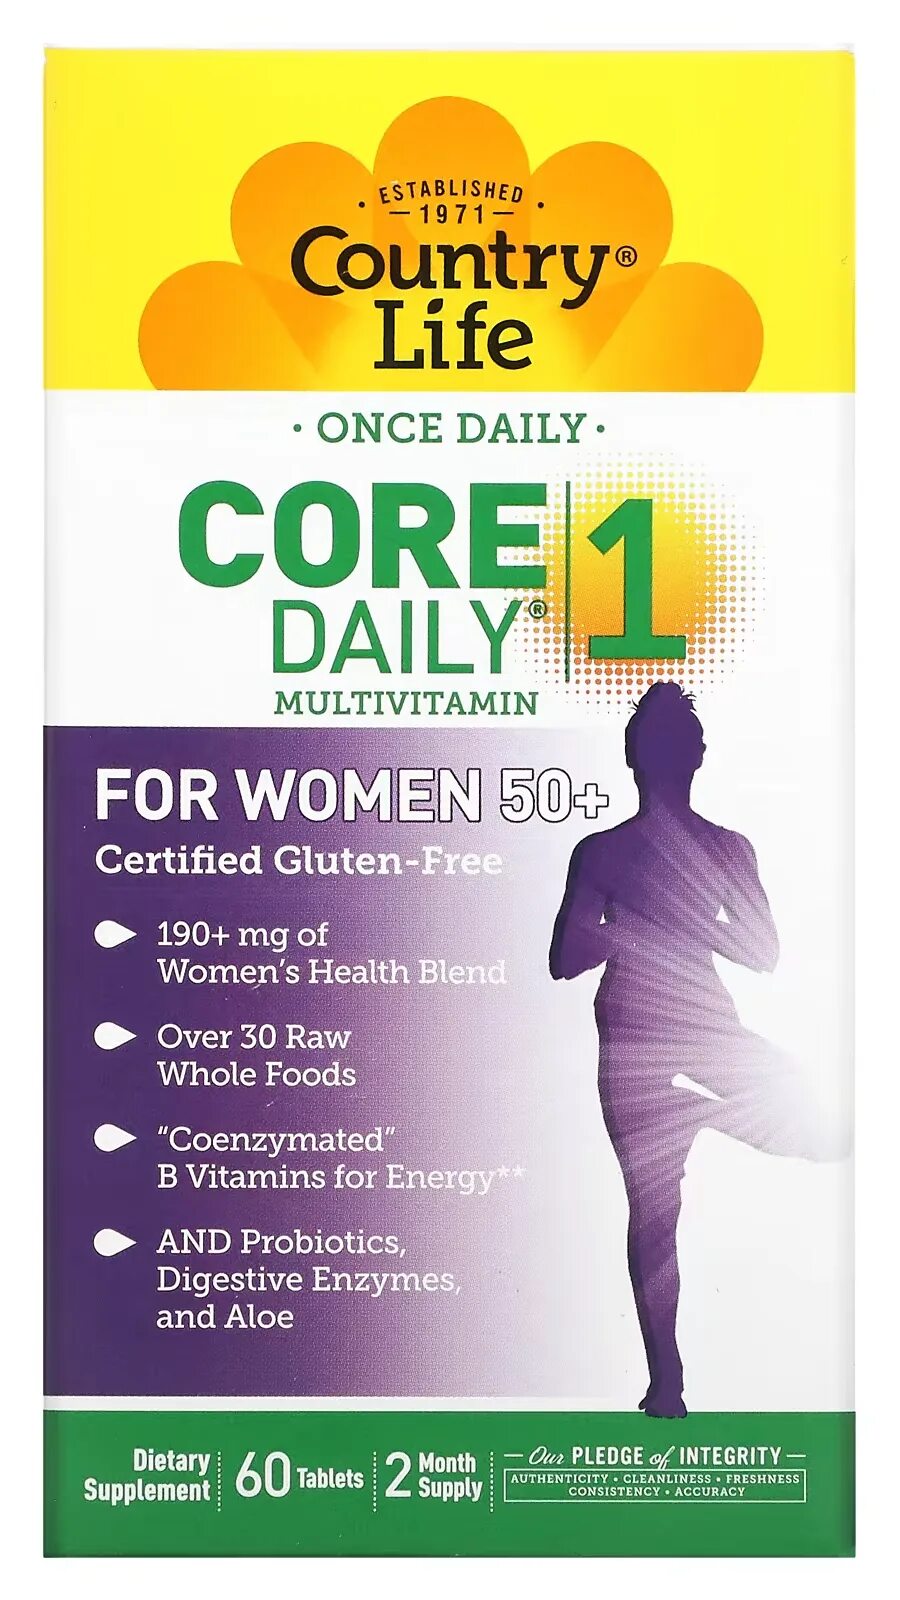 Country Life, мультивитамины Core Daily-1 (women). Country Life Core Daily-1 Multivitamin for women 50+. Country Life, Core Daily -1. Витамины для женщин. Lives cores